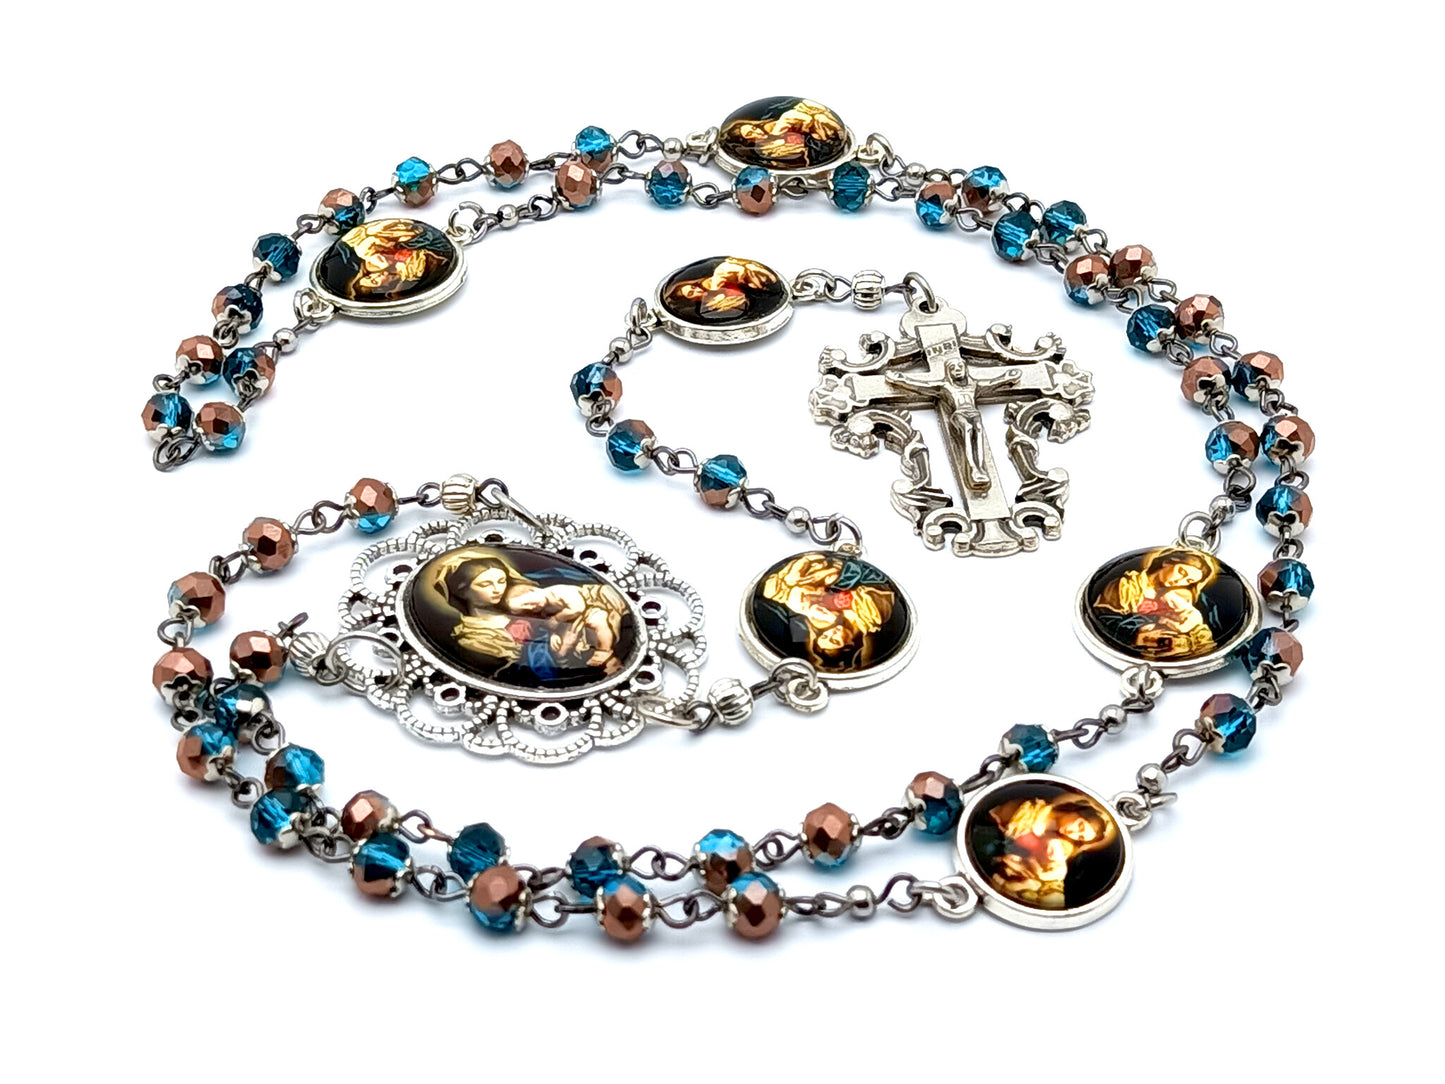 Our Lady of Divine Providence unique rosary beads with glass beads with filigree crucifix and Our Father beads picture medals.